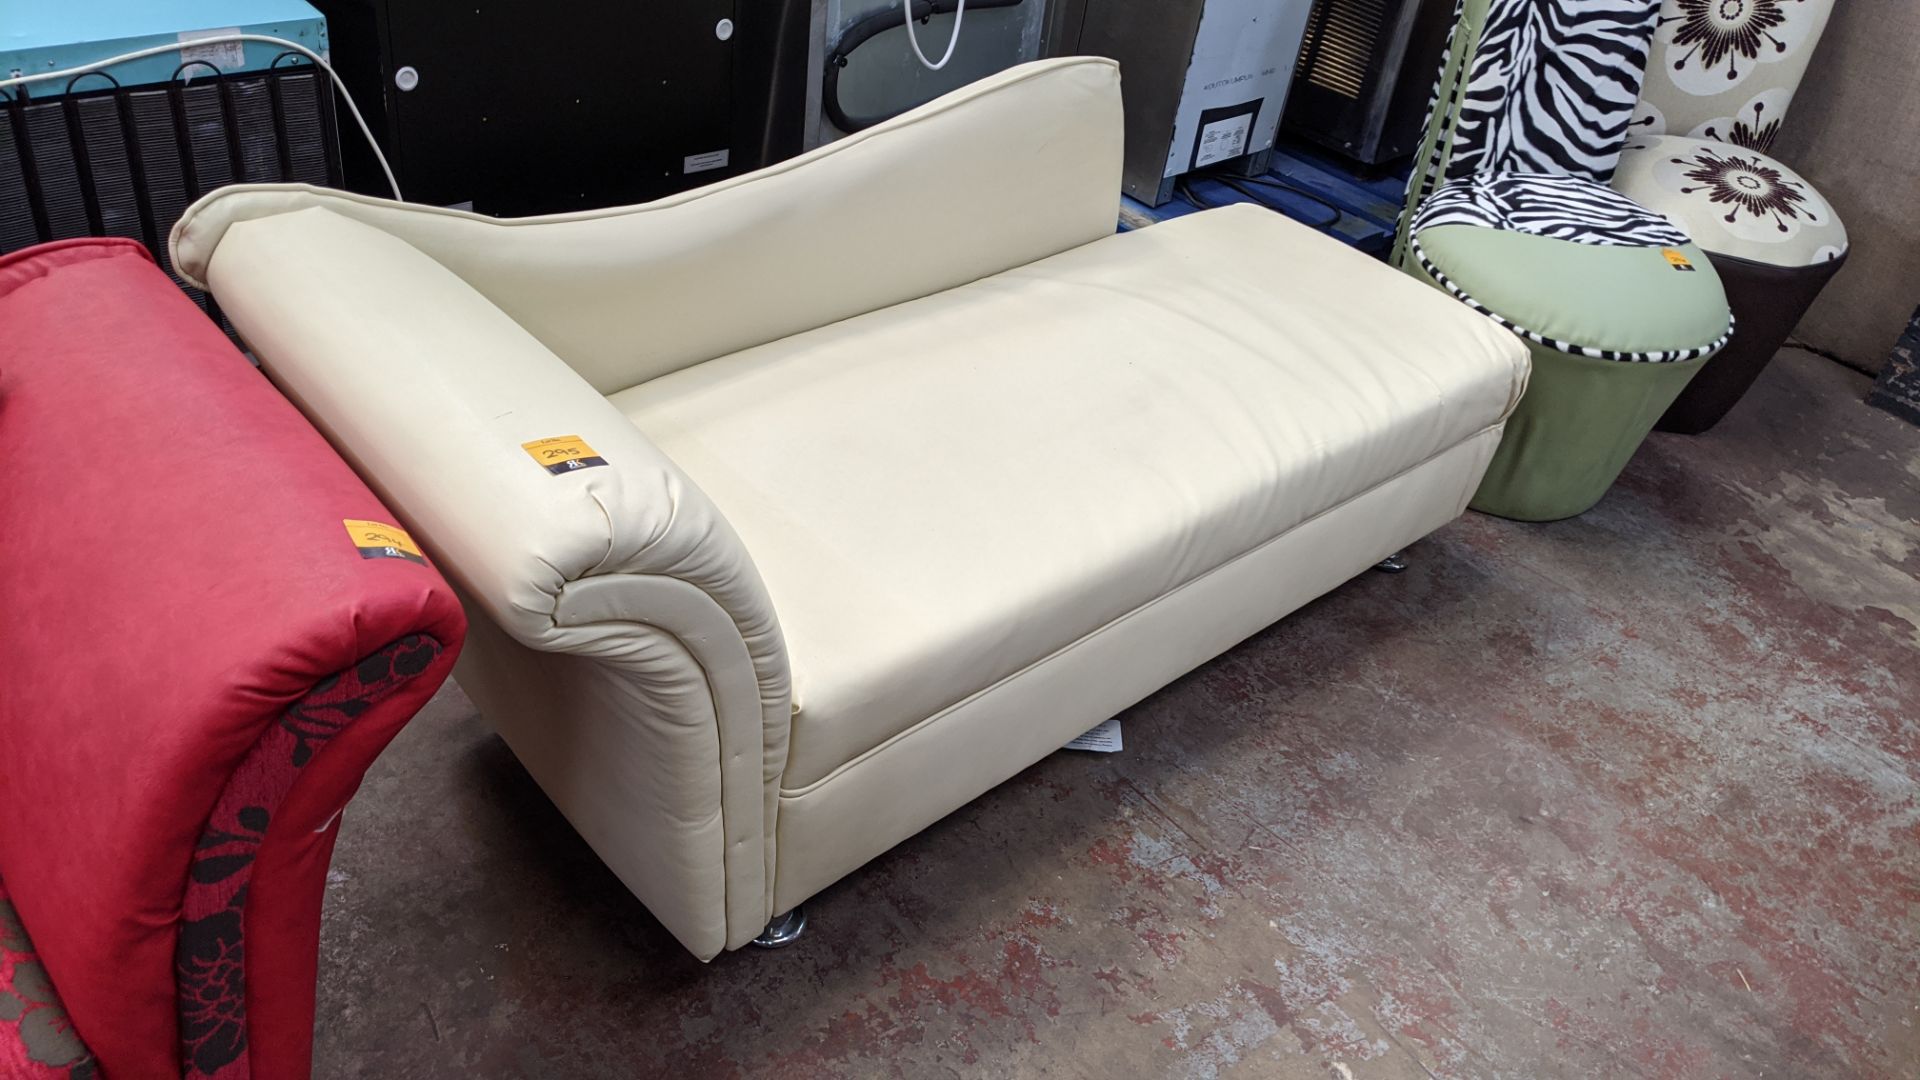 Cream coloured chaise longue with max. dimensions approx. 1650 x 600 x 700mm